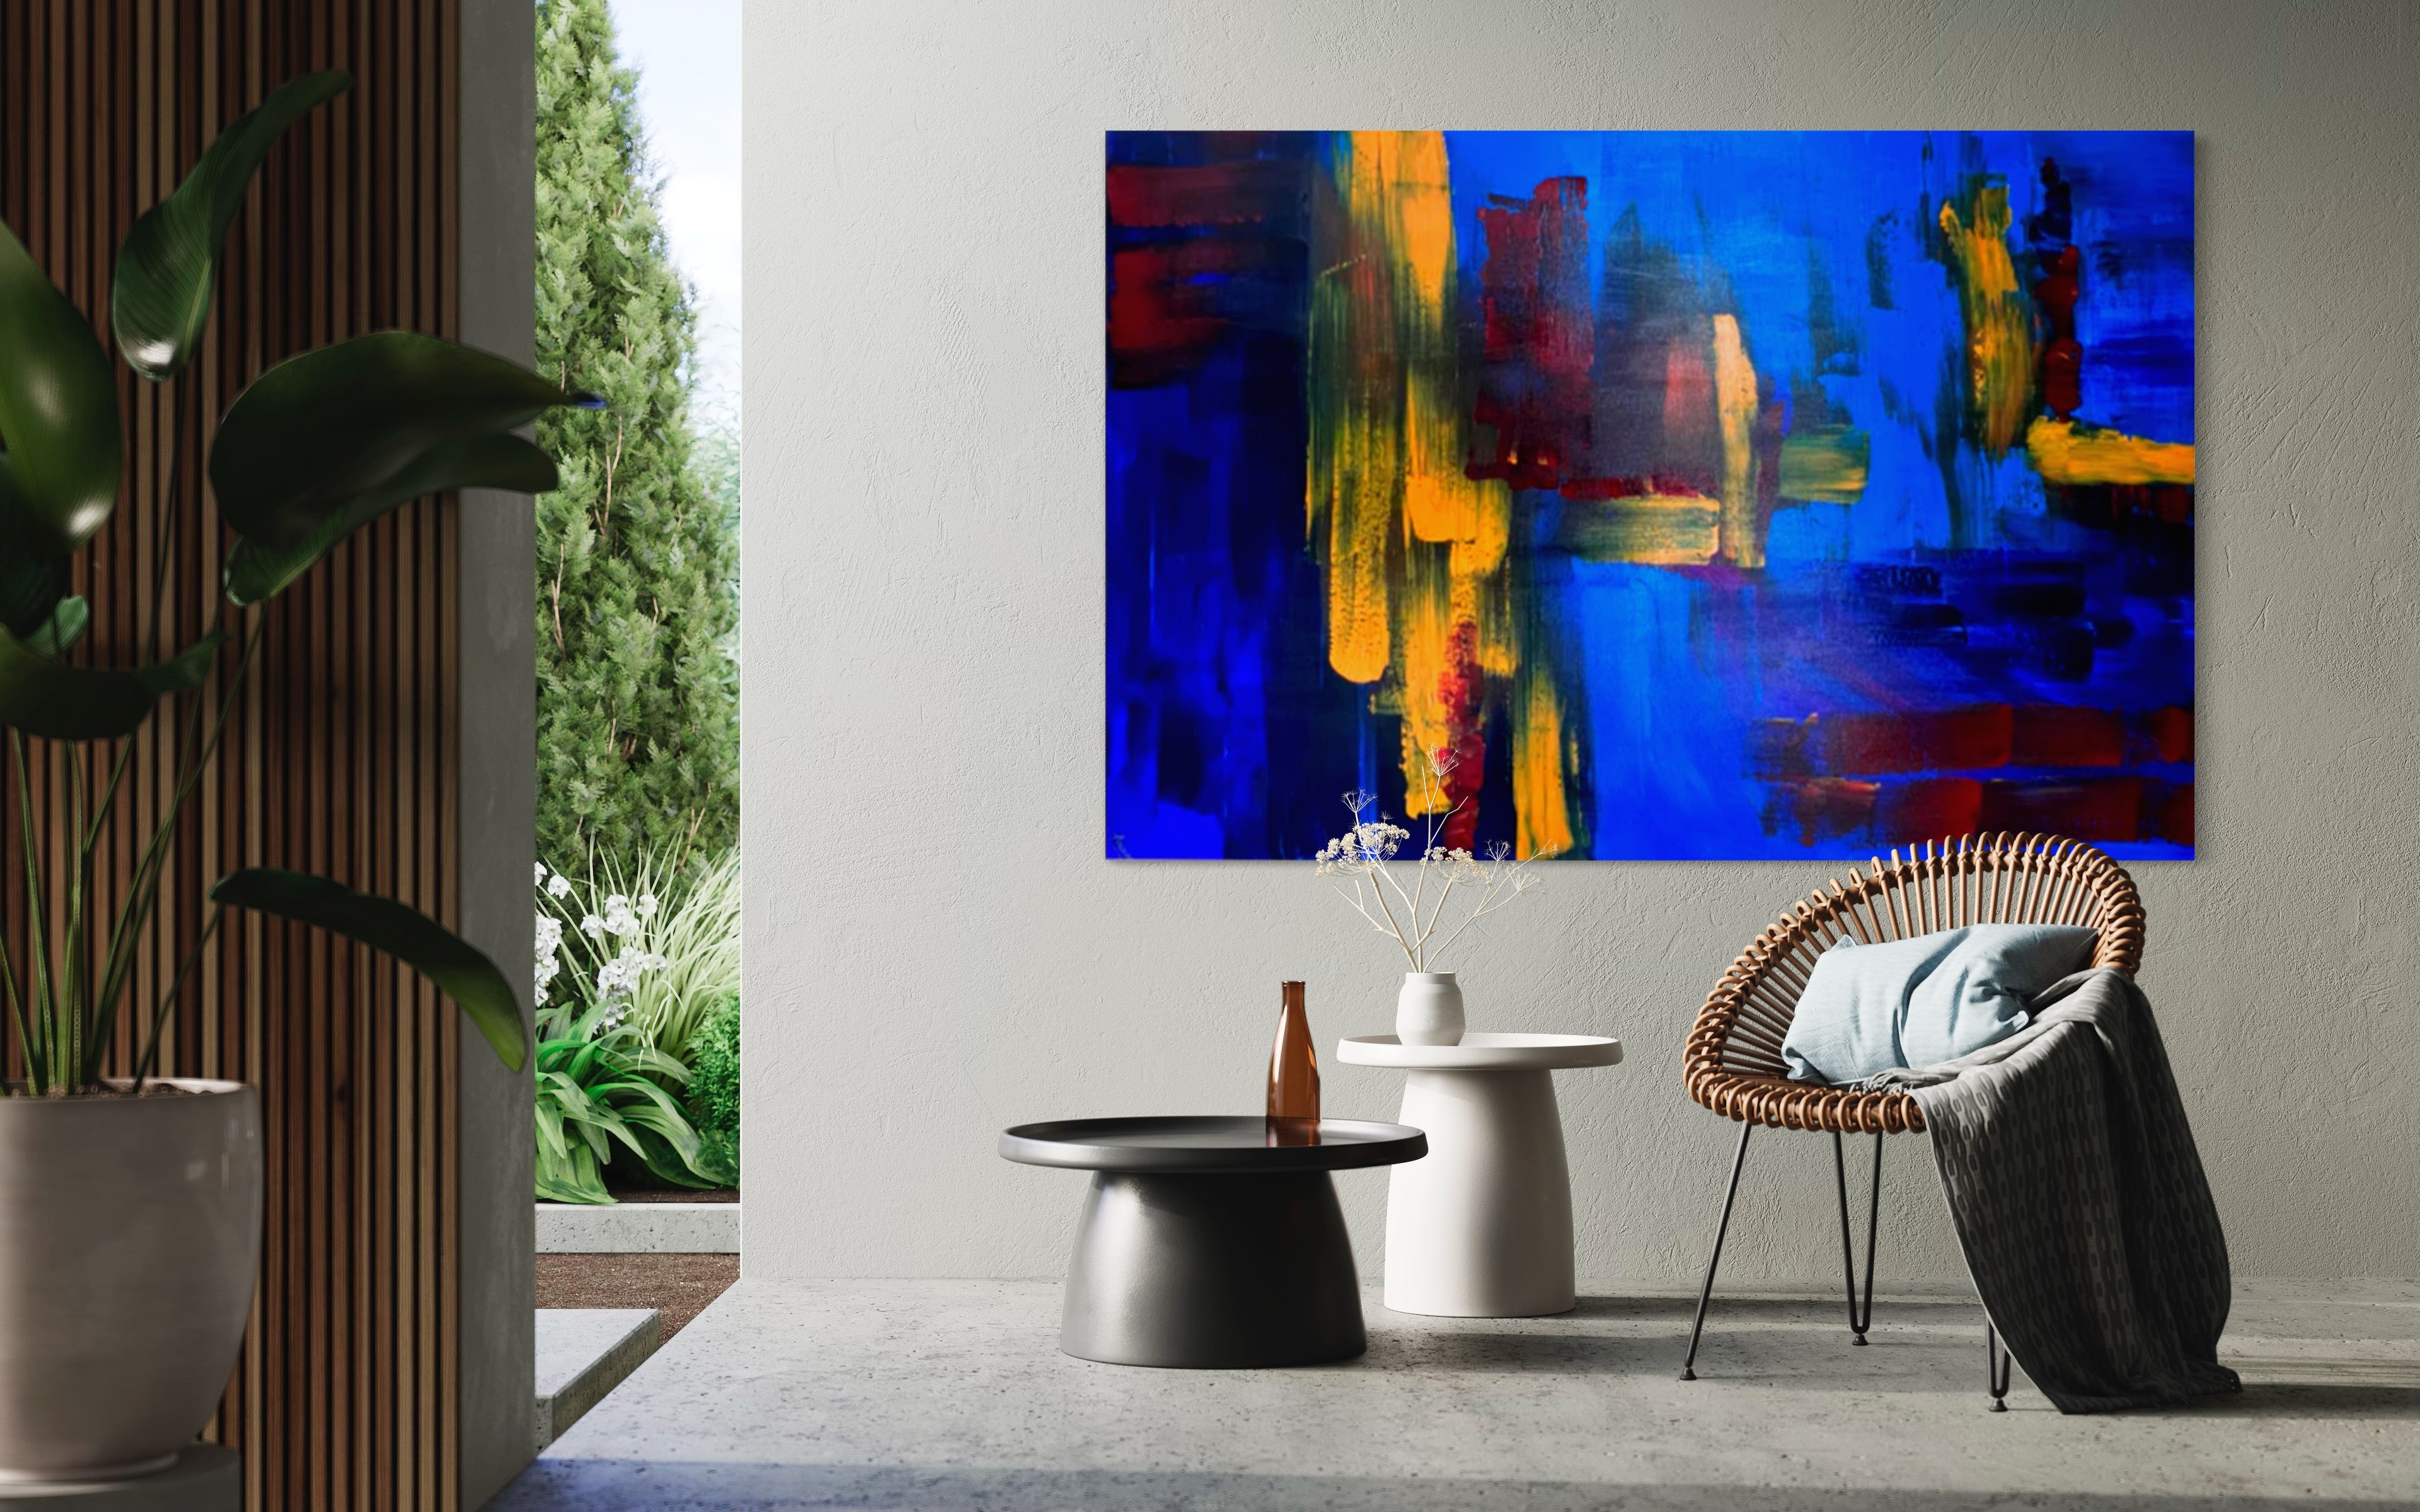 Endless 121.8 cm x 182.8 cm Abstract Painting by Joanne Daniel